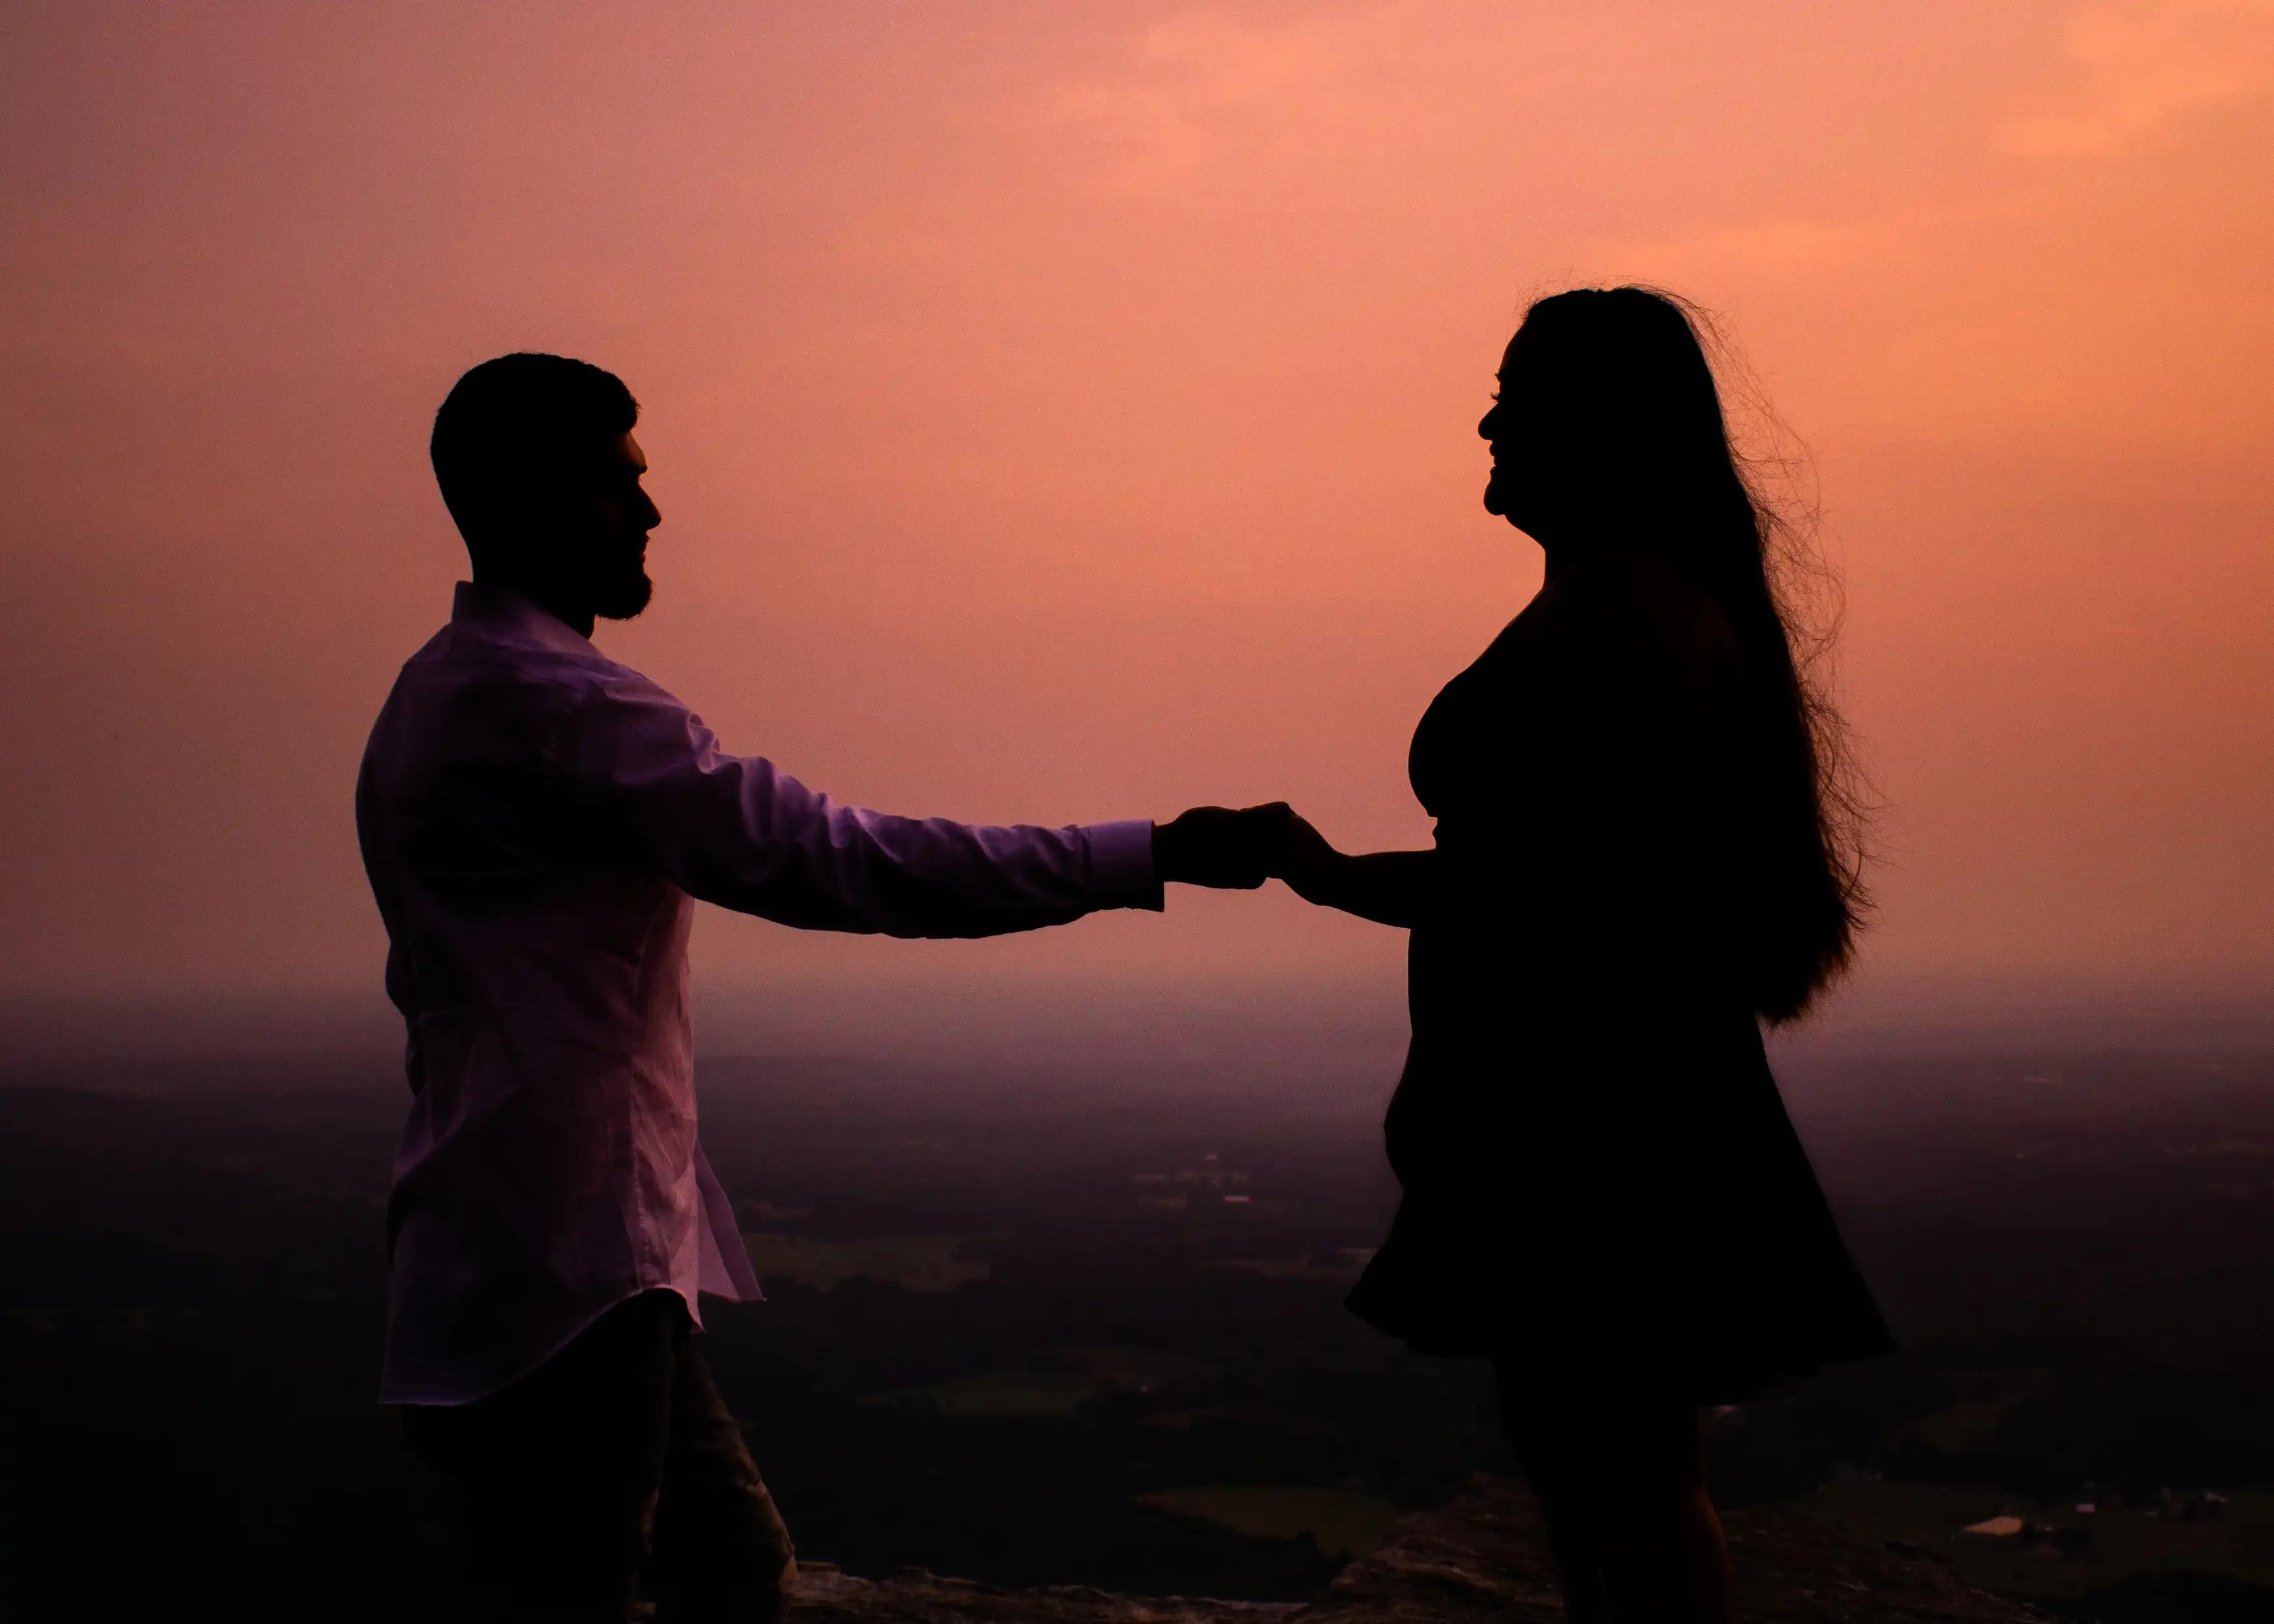 the bride & groom silhouetted by the sunset holding each others hand.